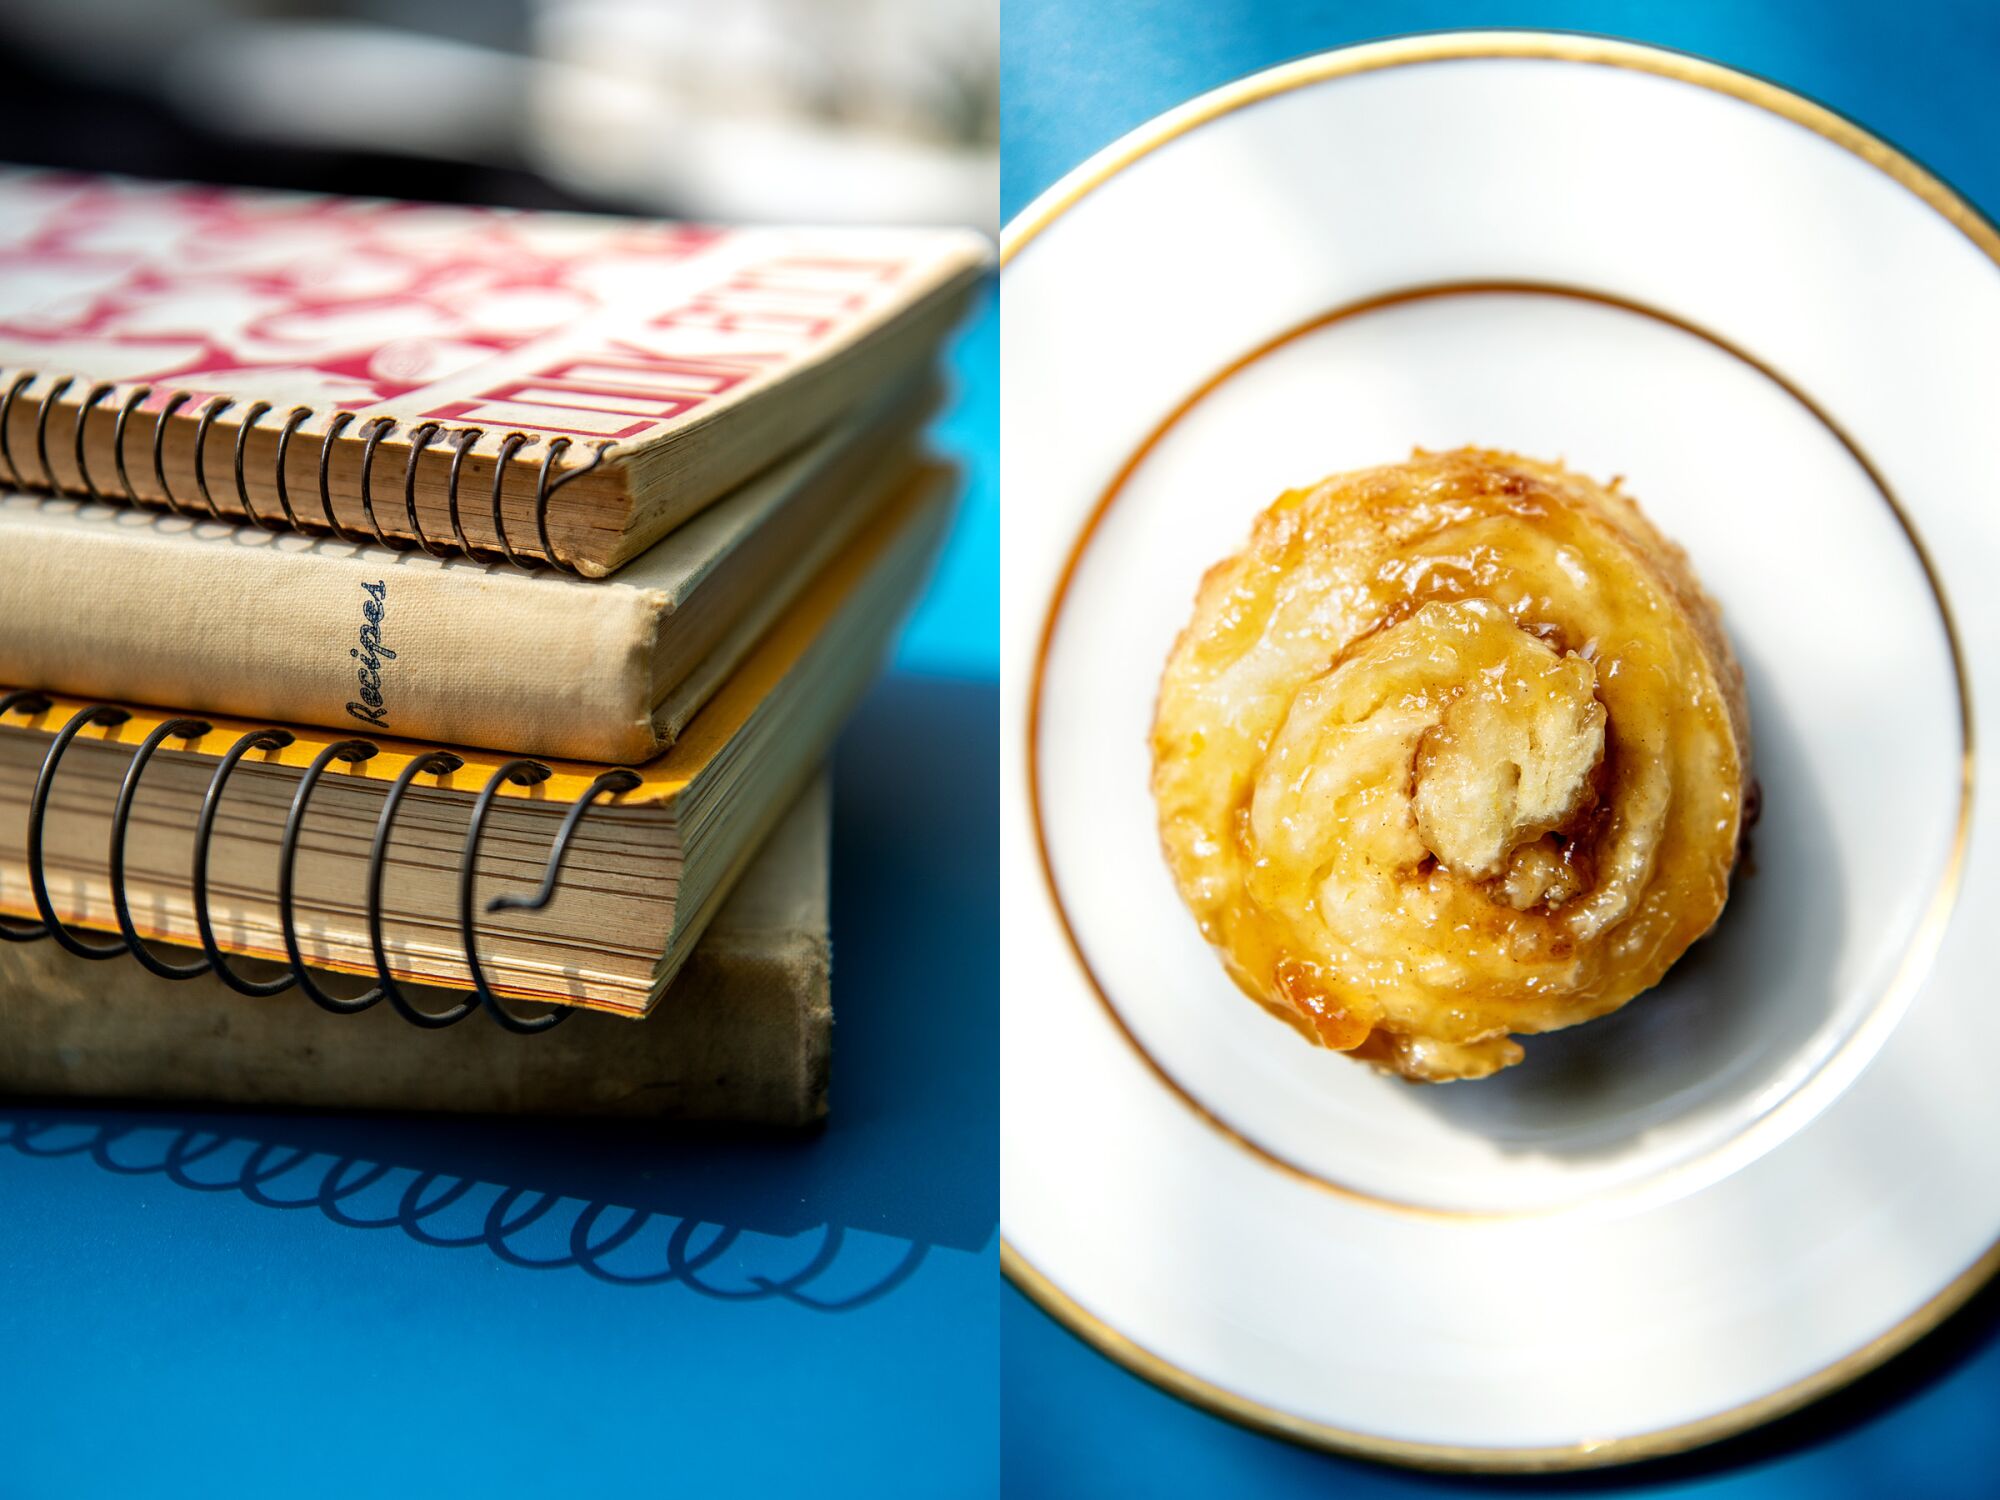 Two images side by side, of a stack of cookbooks, left, and an orange biscuit on a plate, right.